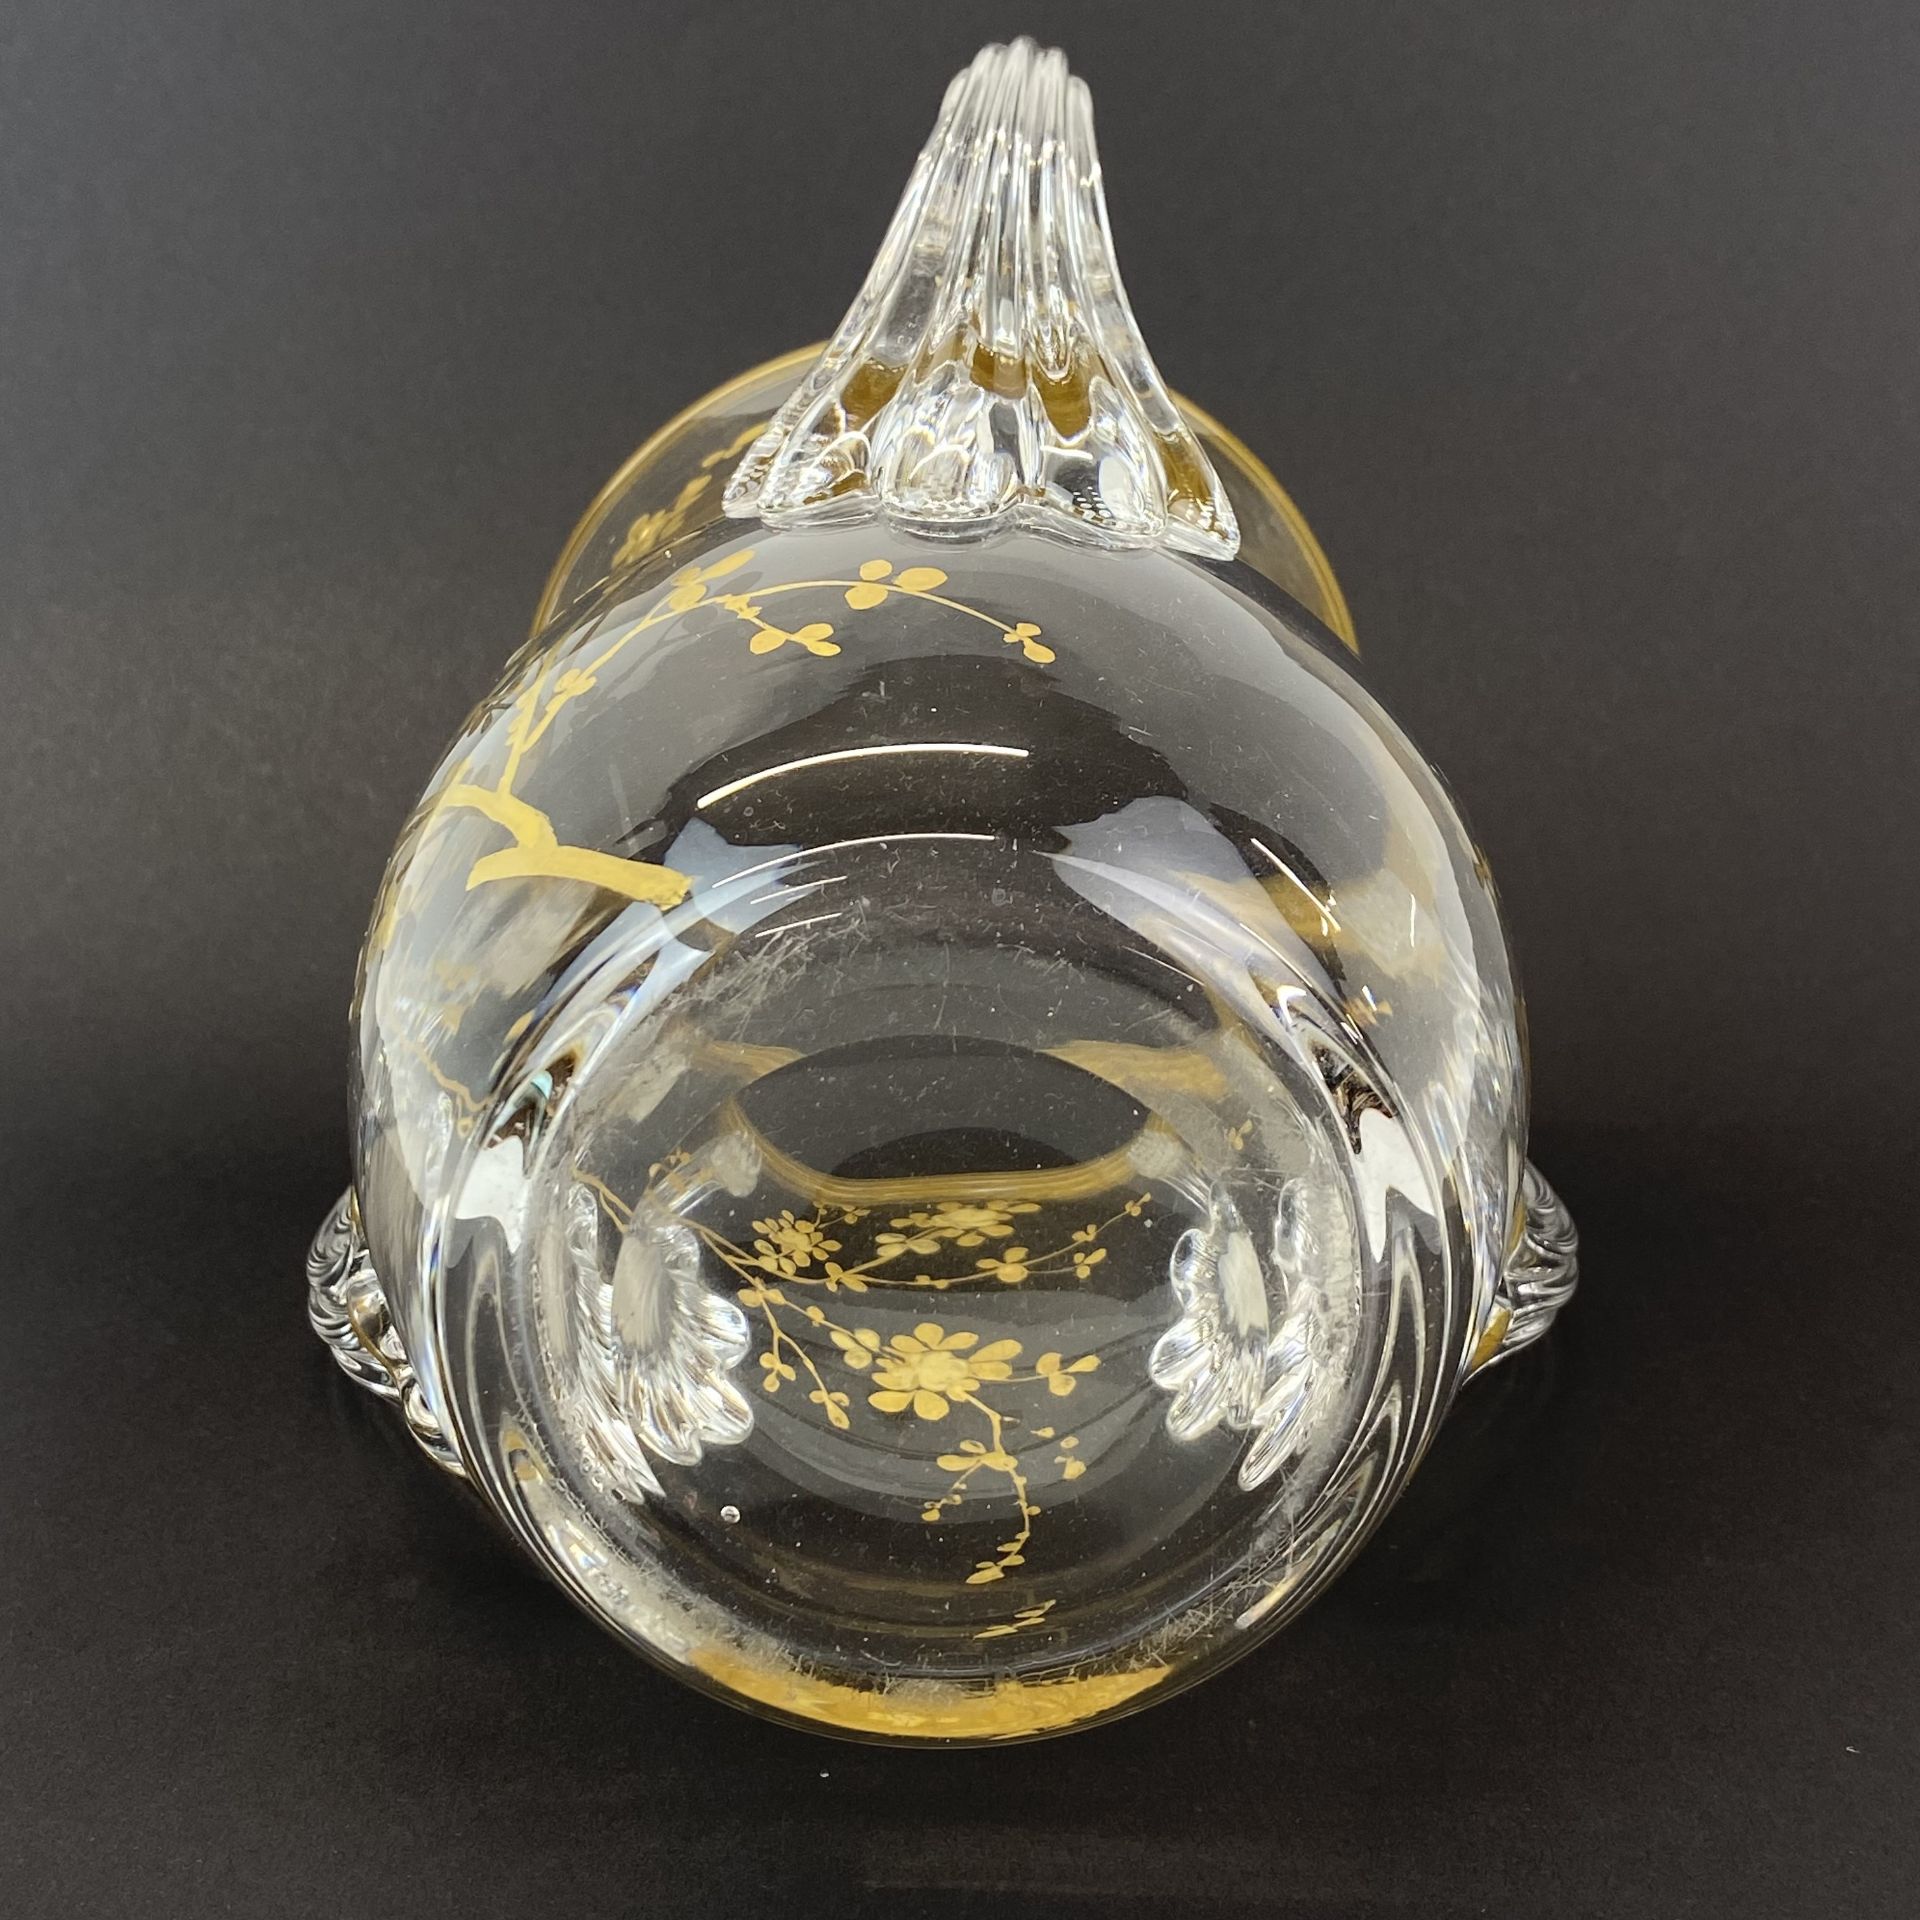 A fine hand gilded three handled crystal vase, H. 18cm. - Image 2 of 2